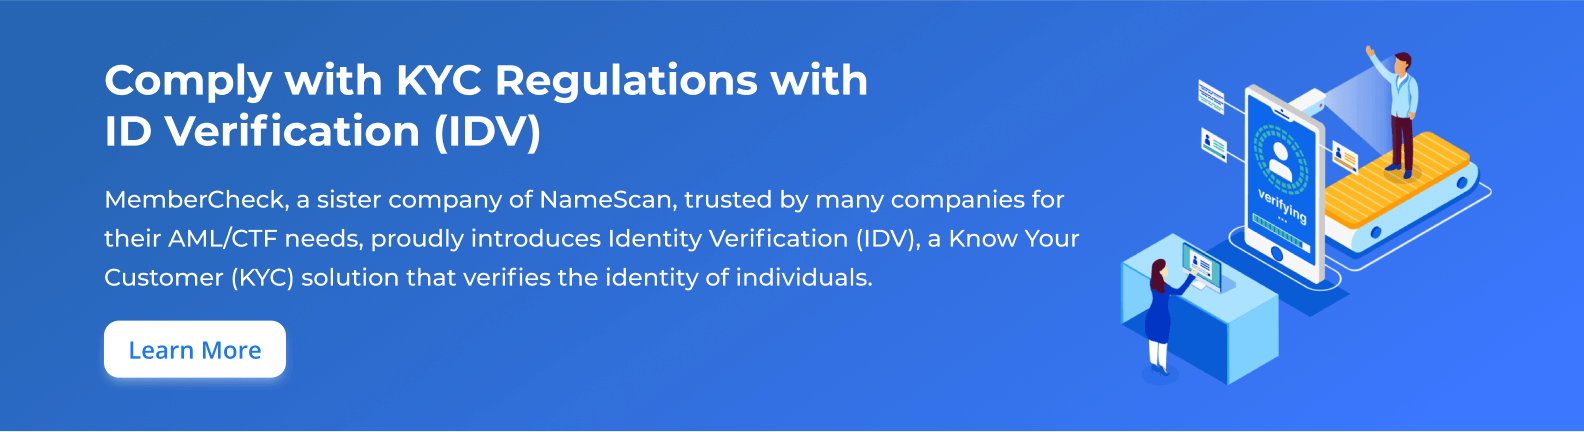 Comply with KYC Regulations with ID Verification (IDV)